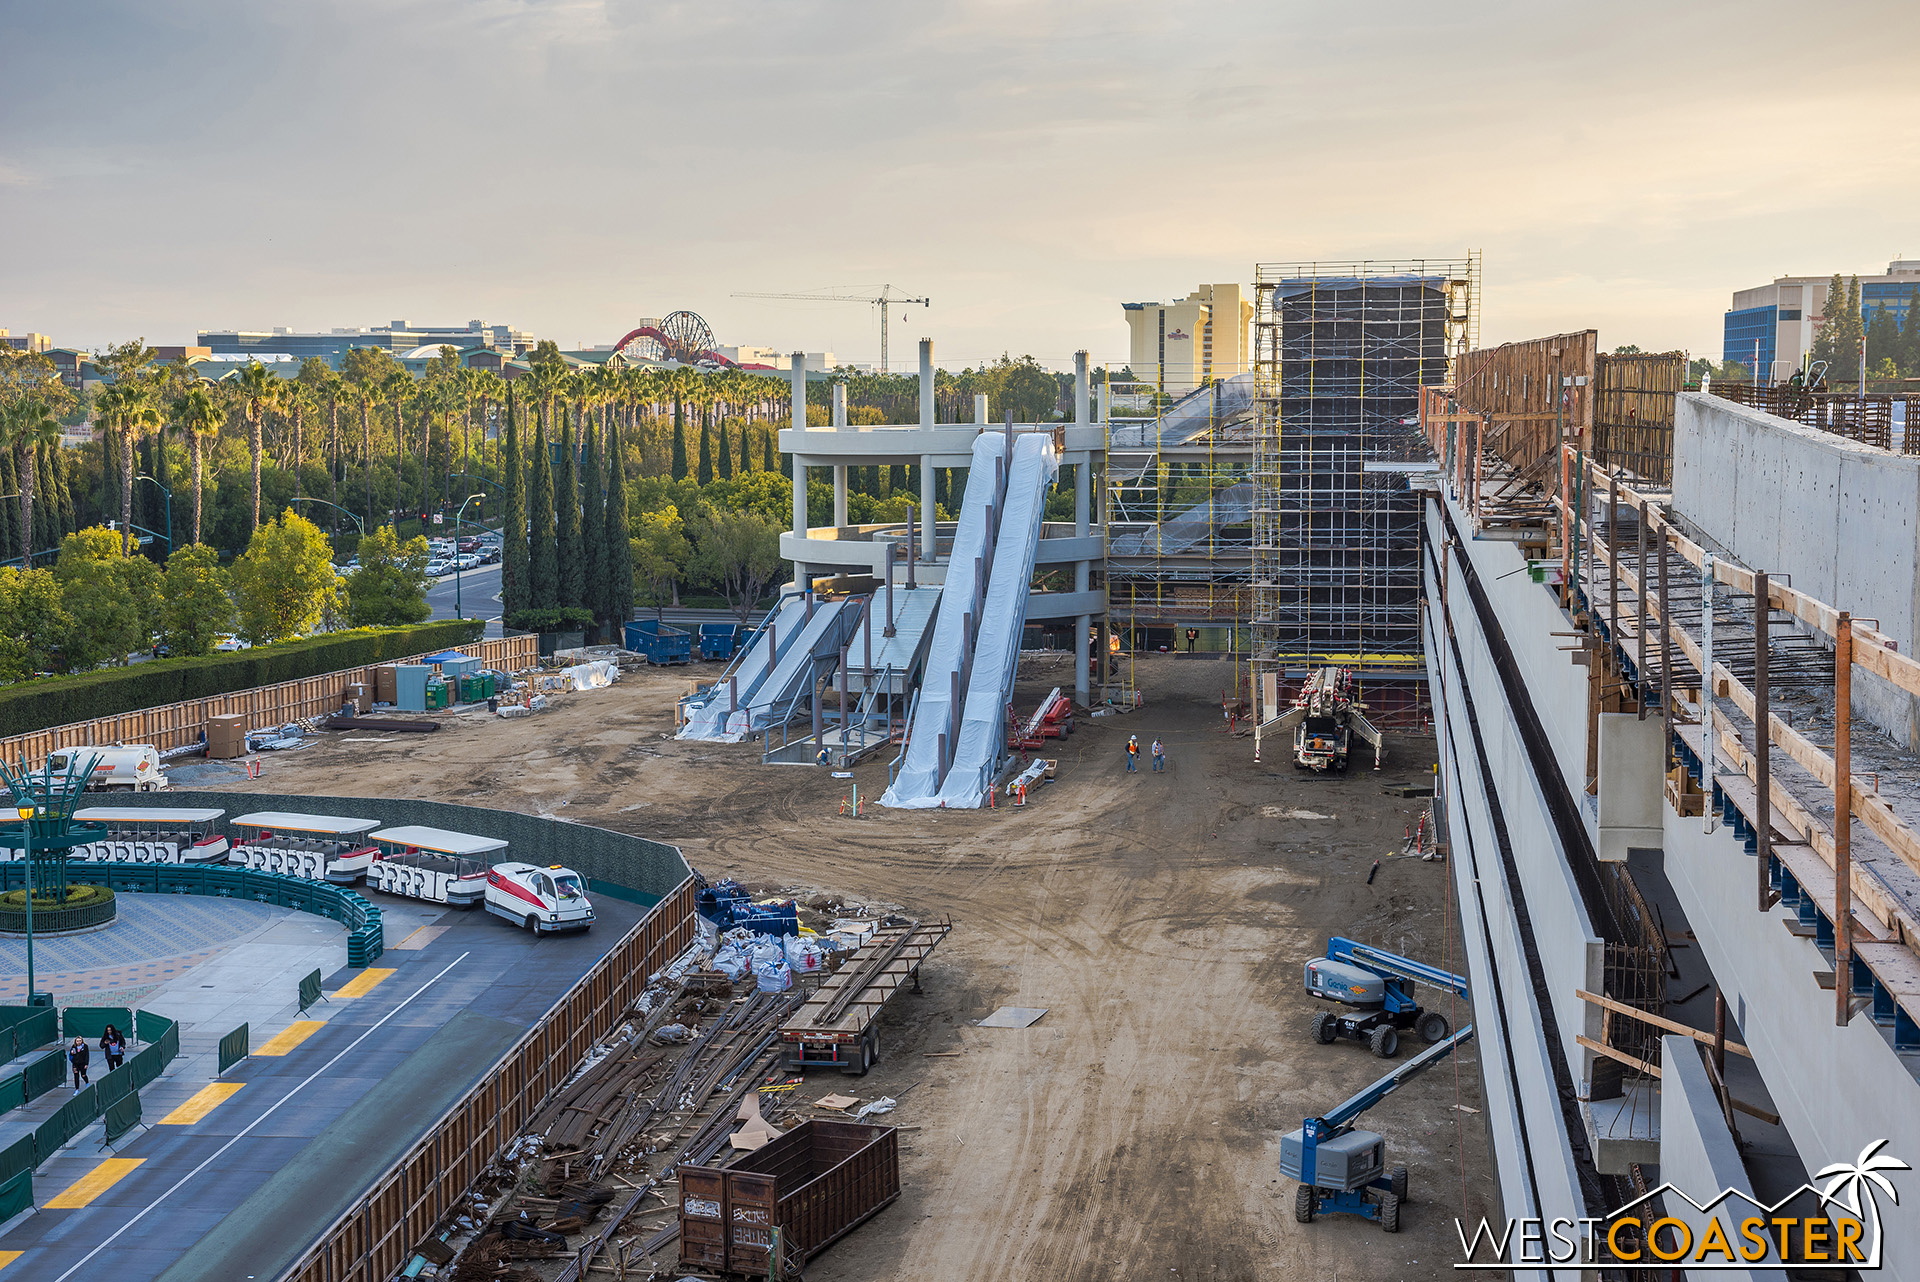  Over on the southeast corner of the new parking structure, the escalator promenade and elevator tower continue to progress. 